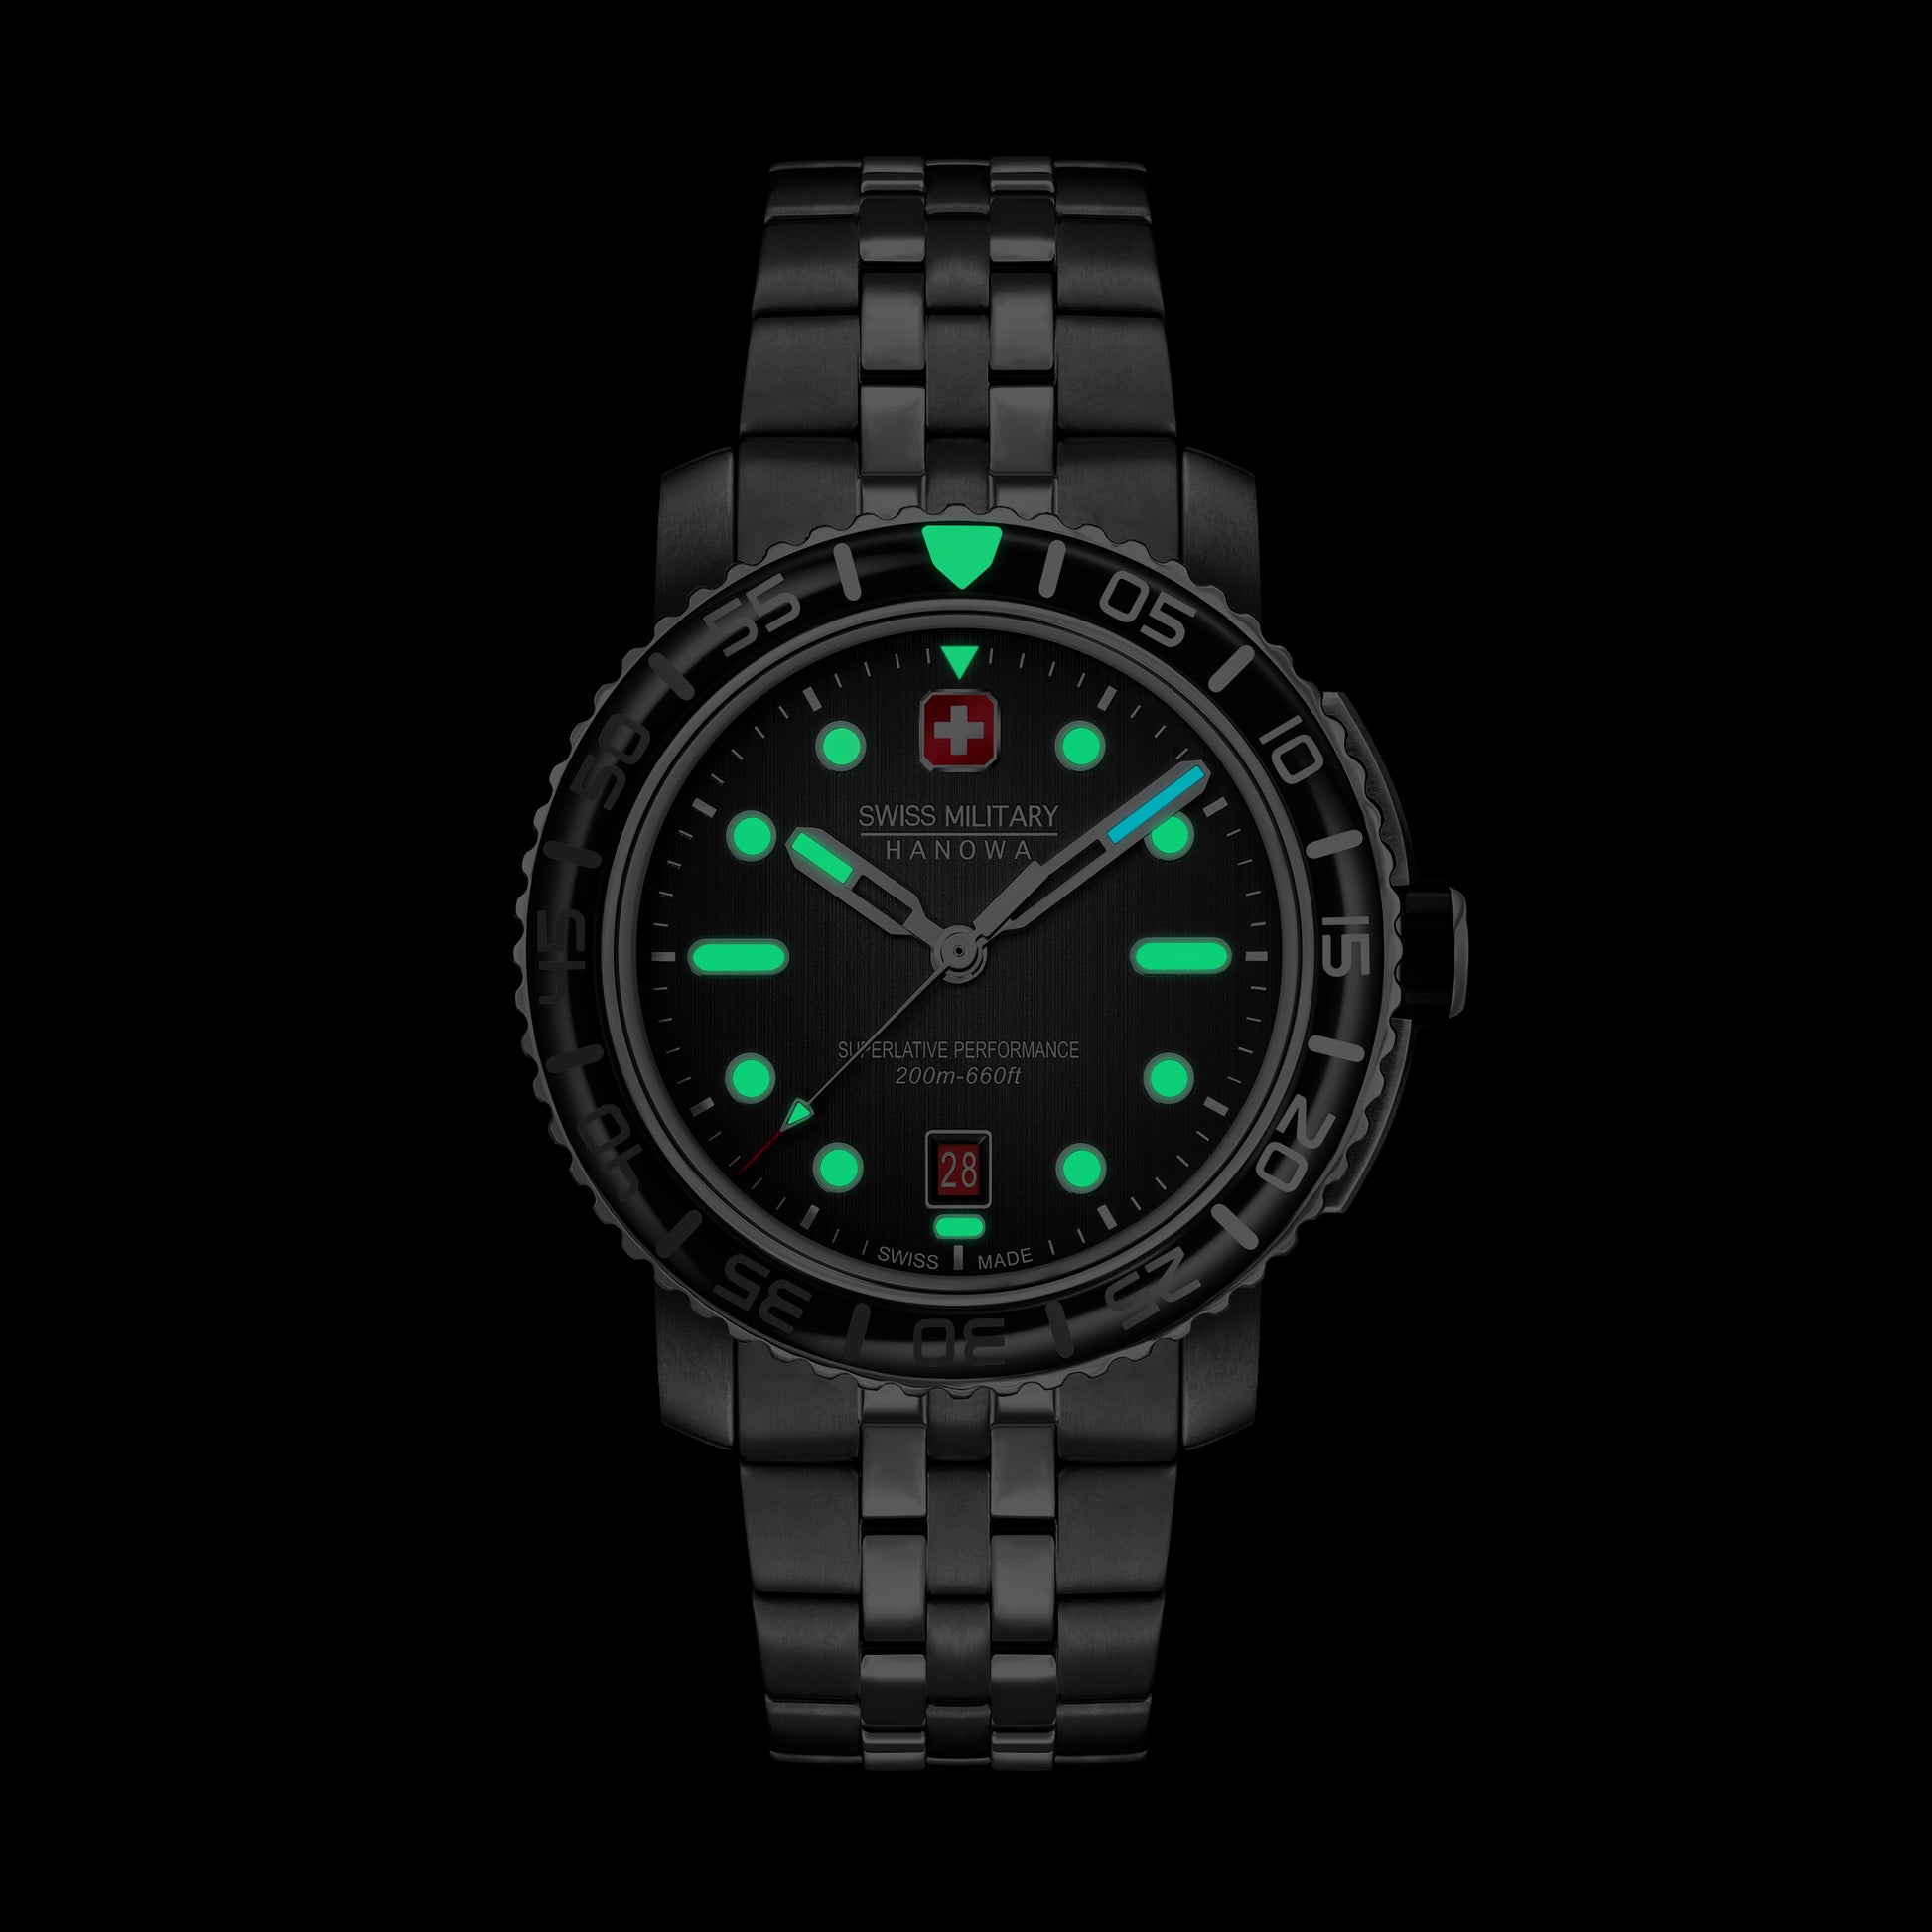 Swiss Military Hanowa Black Marlin SMWGH0001702 , Stainless steel case, black dial, Stainless steel bracelet. Visibility in the night through luminous.